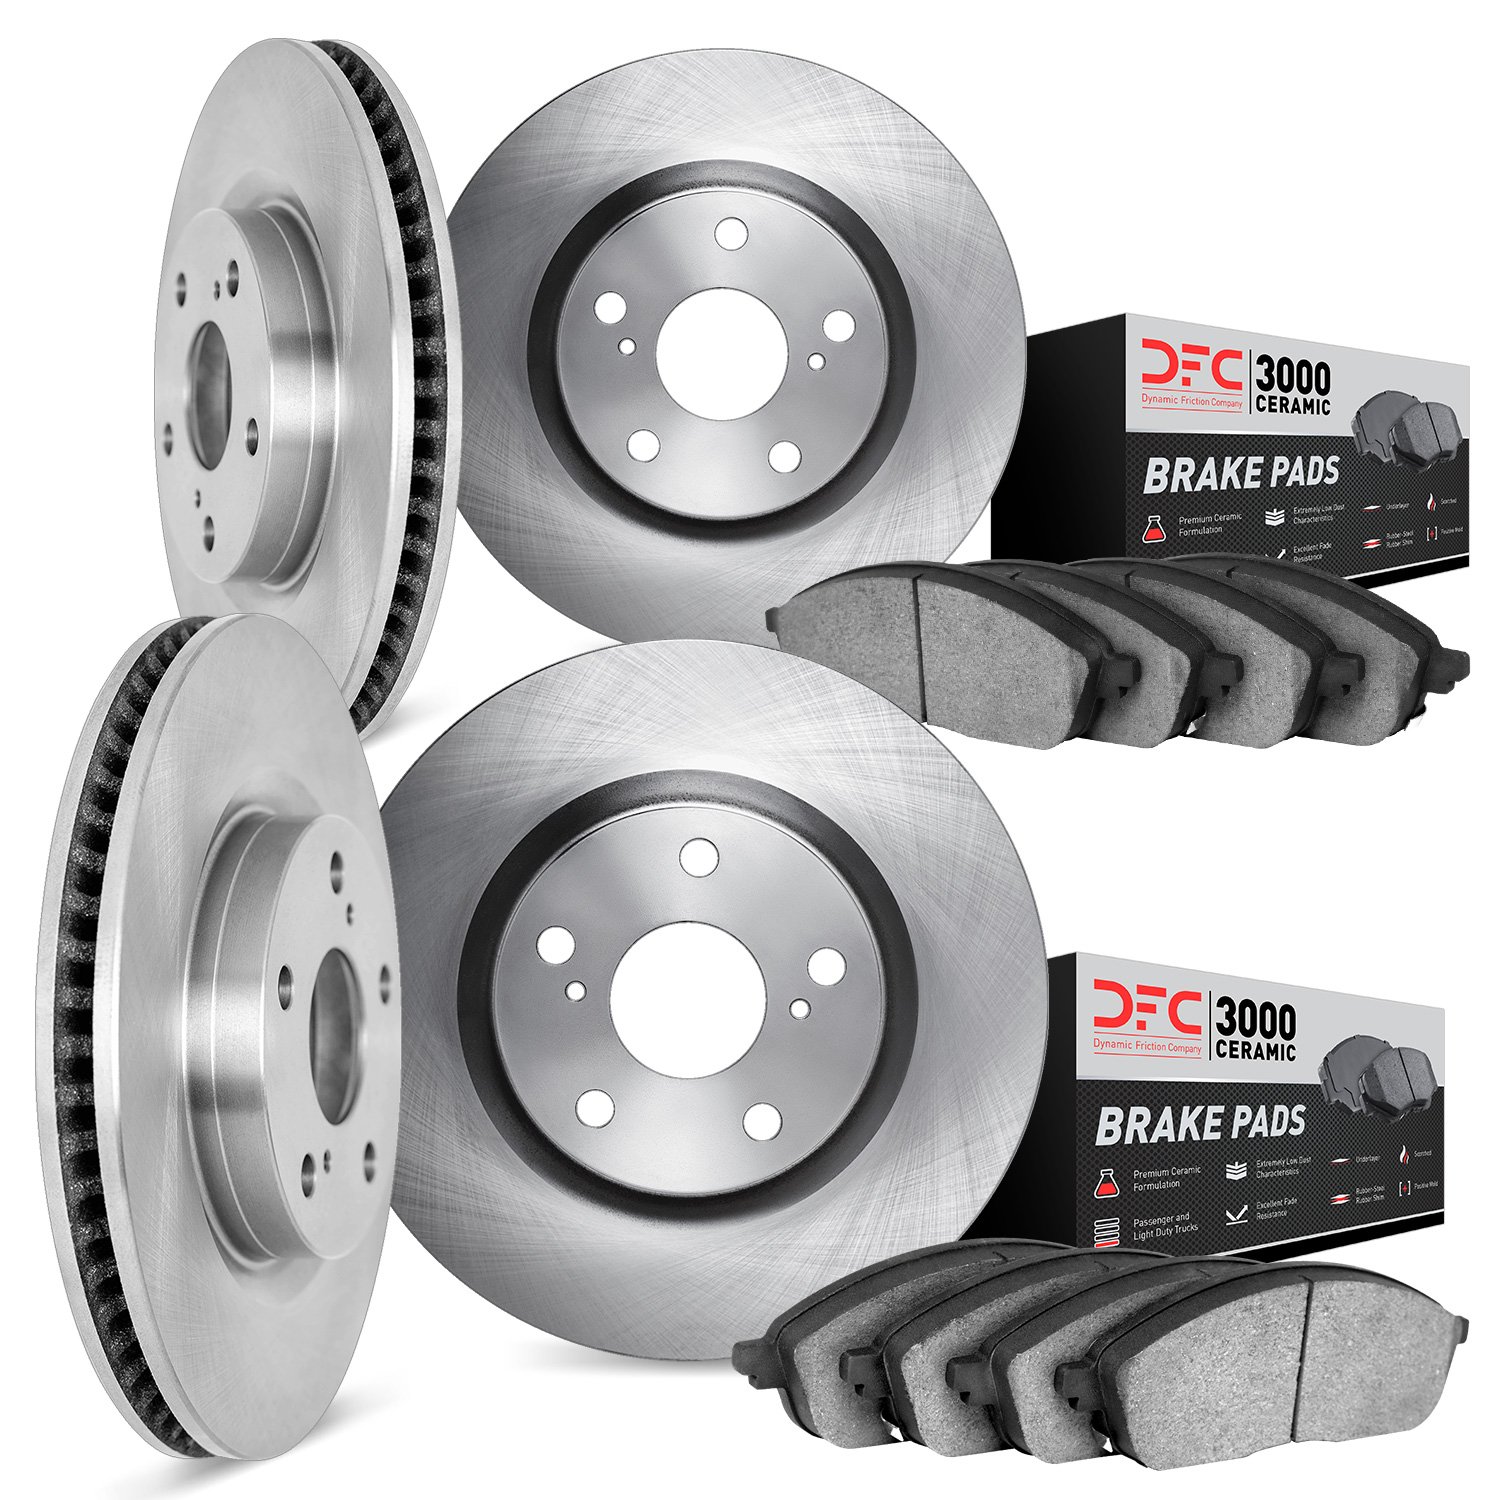 6304-74032 Brake Rotors with 3000-Series Ceramic Brake Pads Kit, 2003-2015 Multiple Makes/Models, Position: Front and Rear